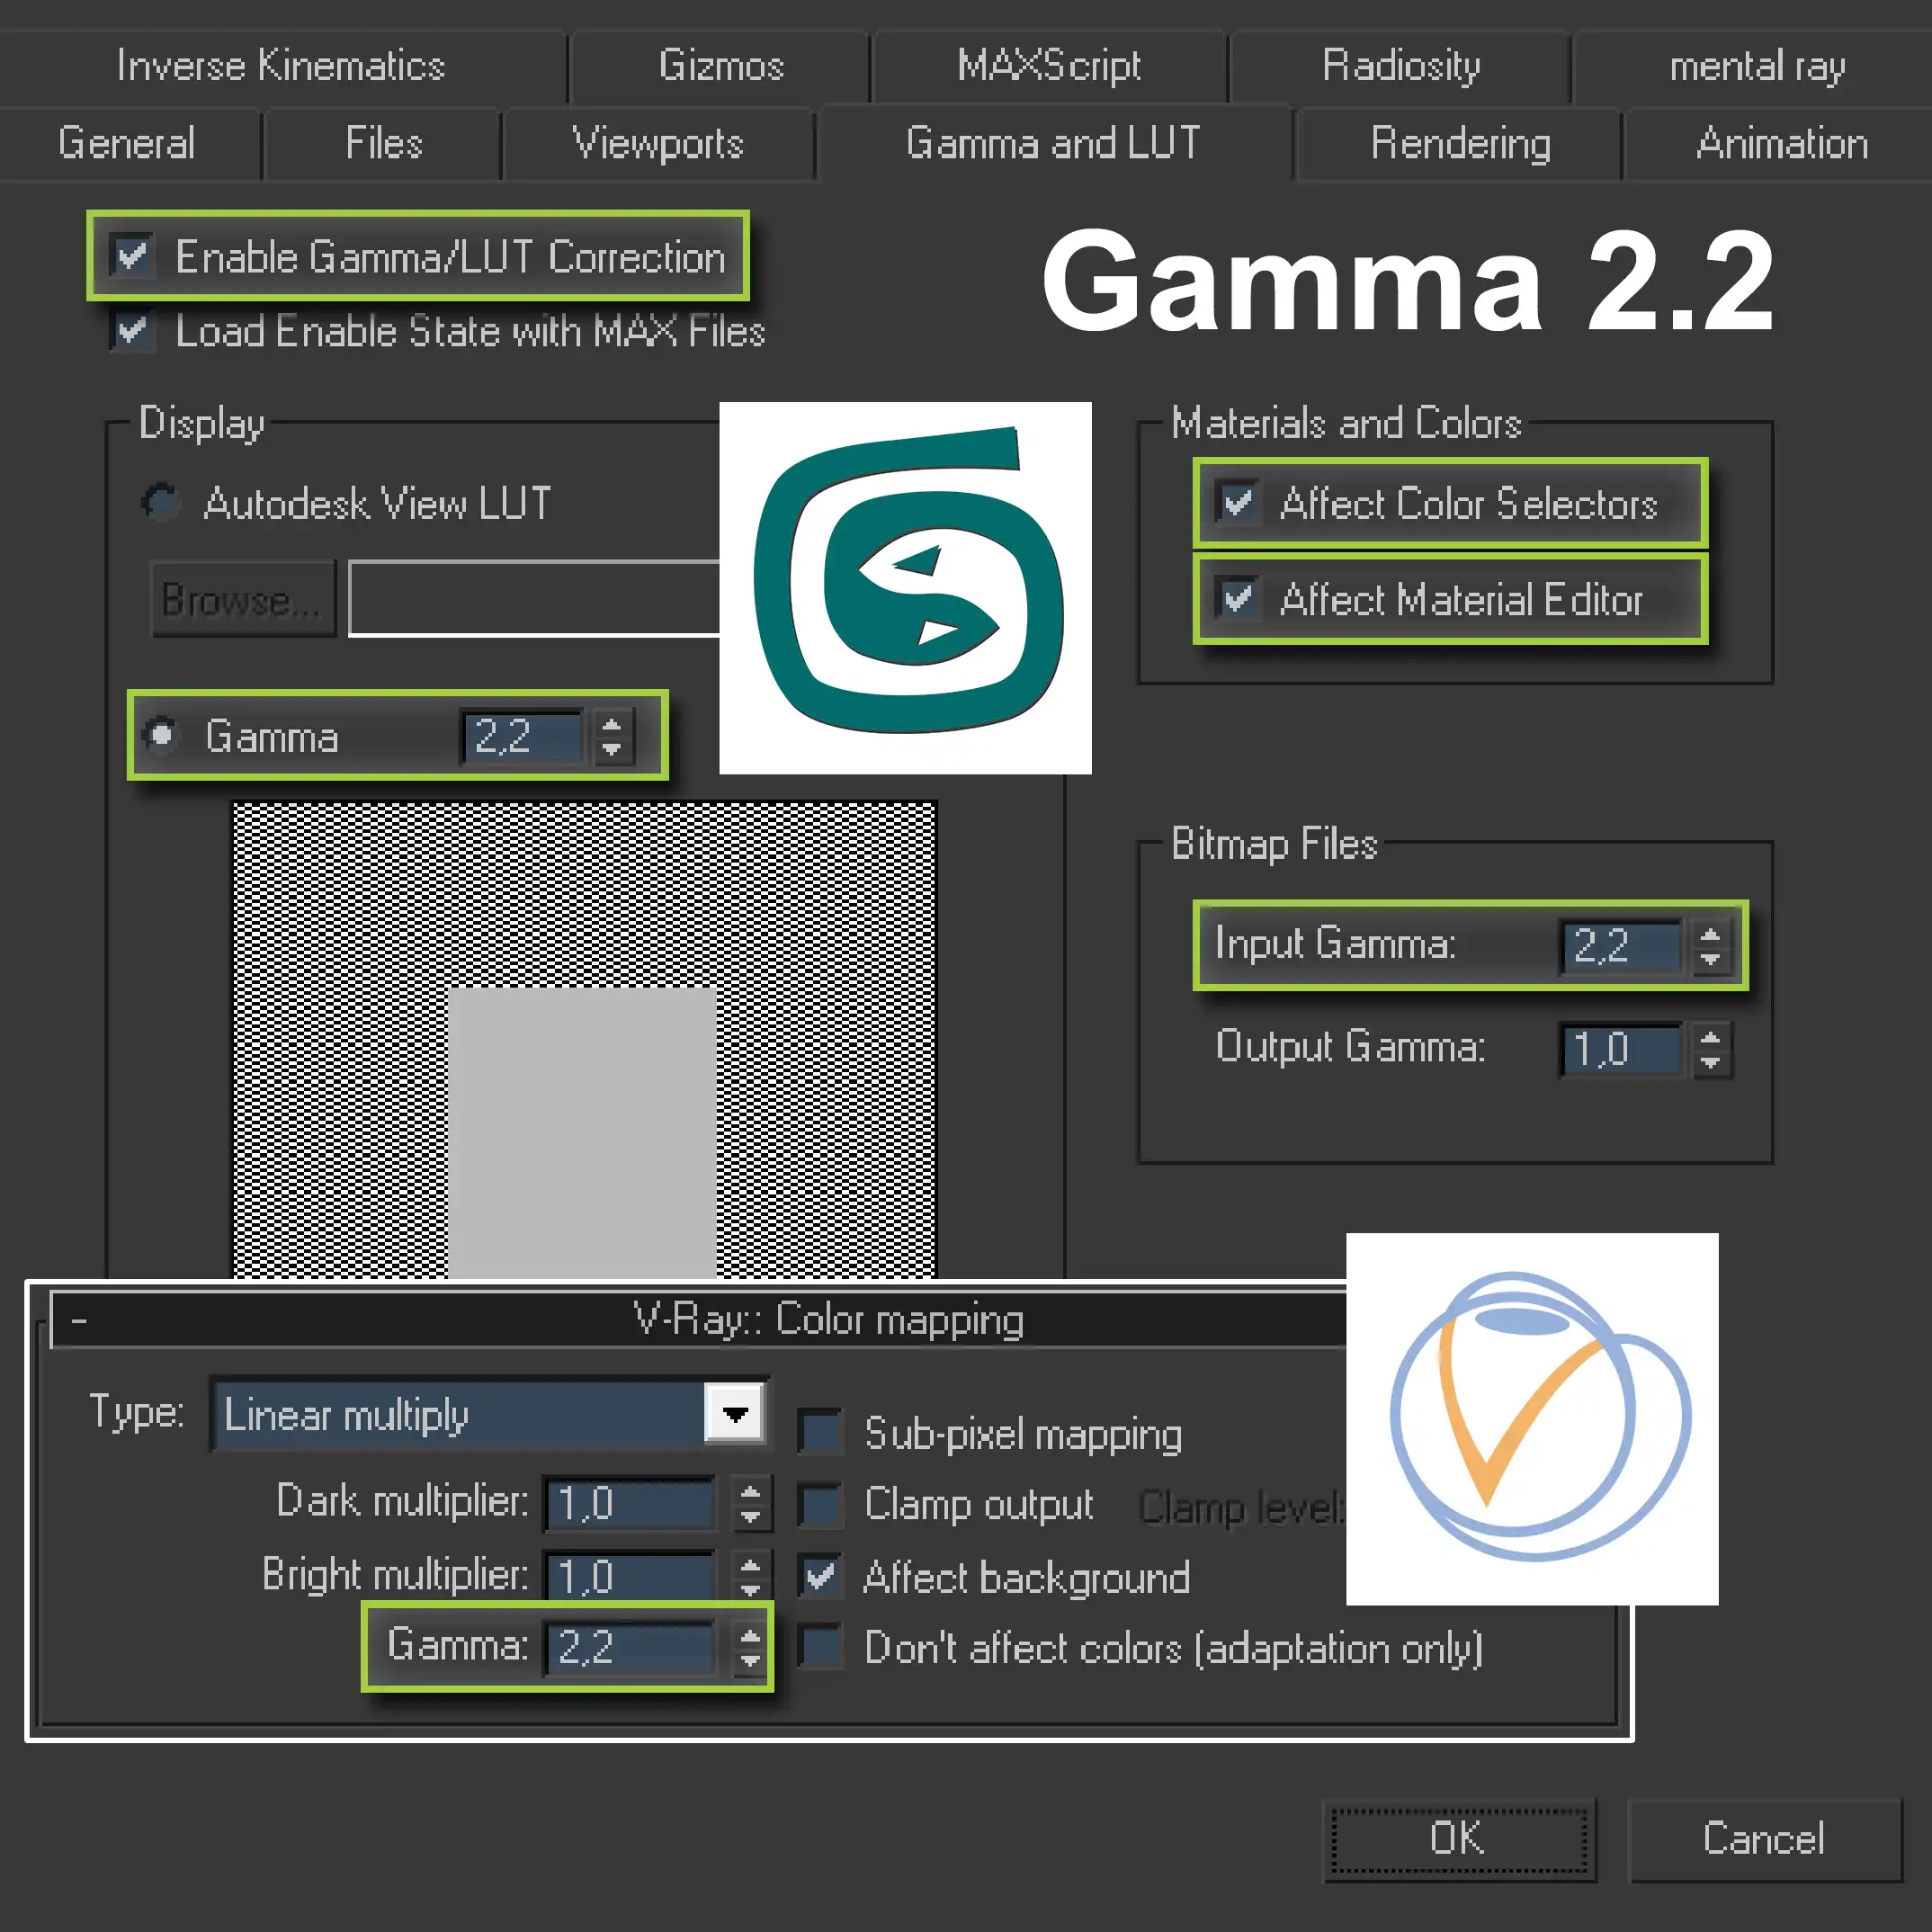 Poster for the quick tutorial describing the gamma correction settings for V-Ray 1.5 and 3ds Max 2008 gamma 2.2 workflow.